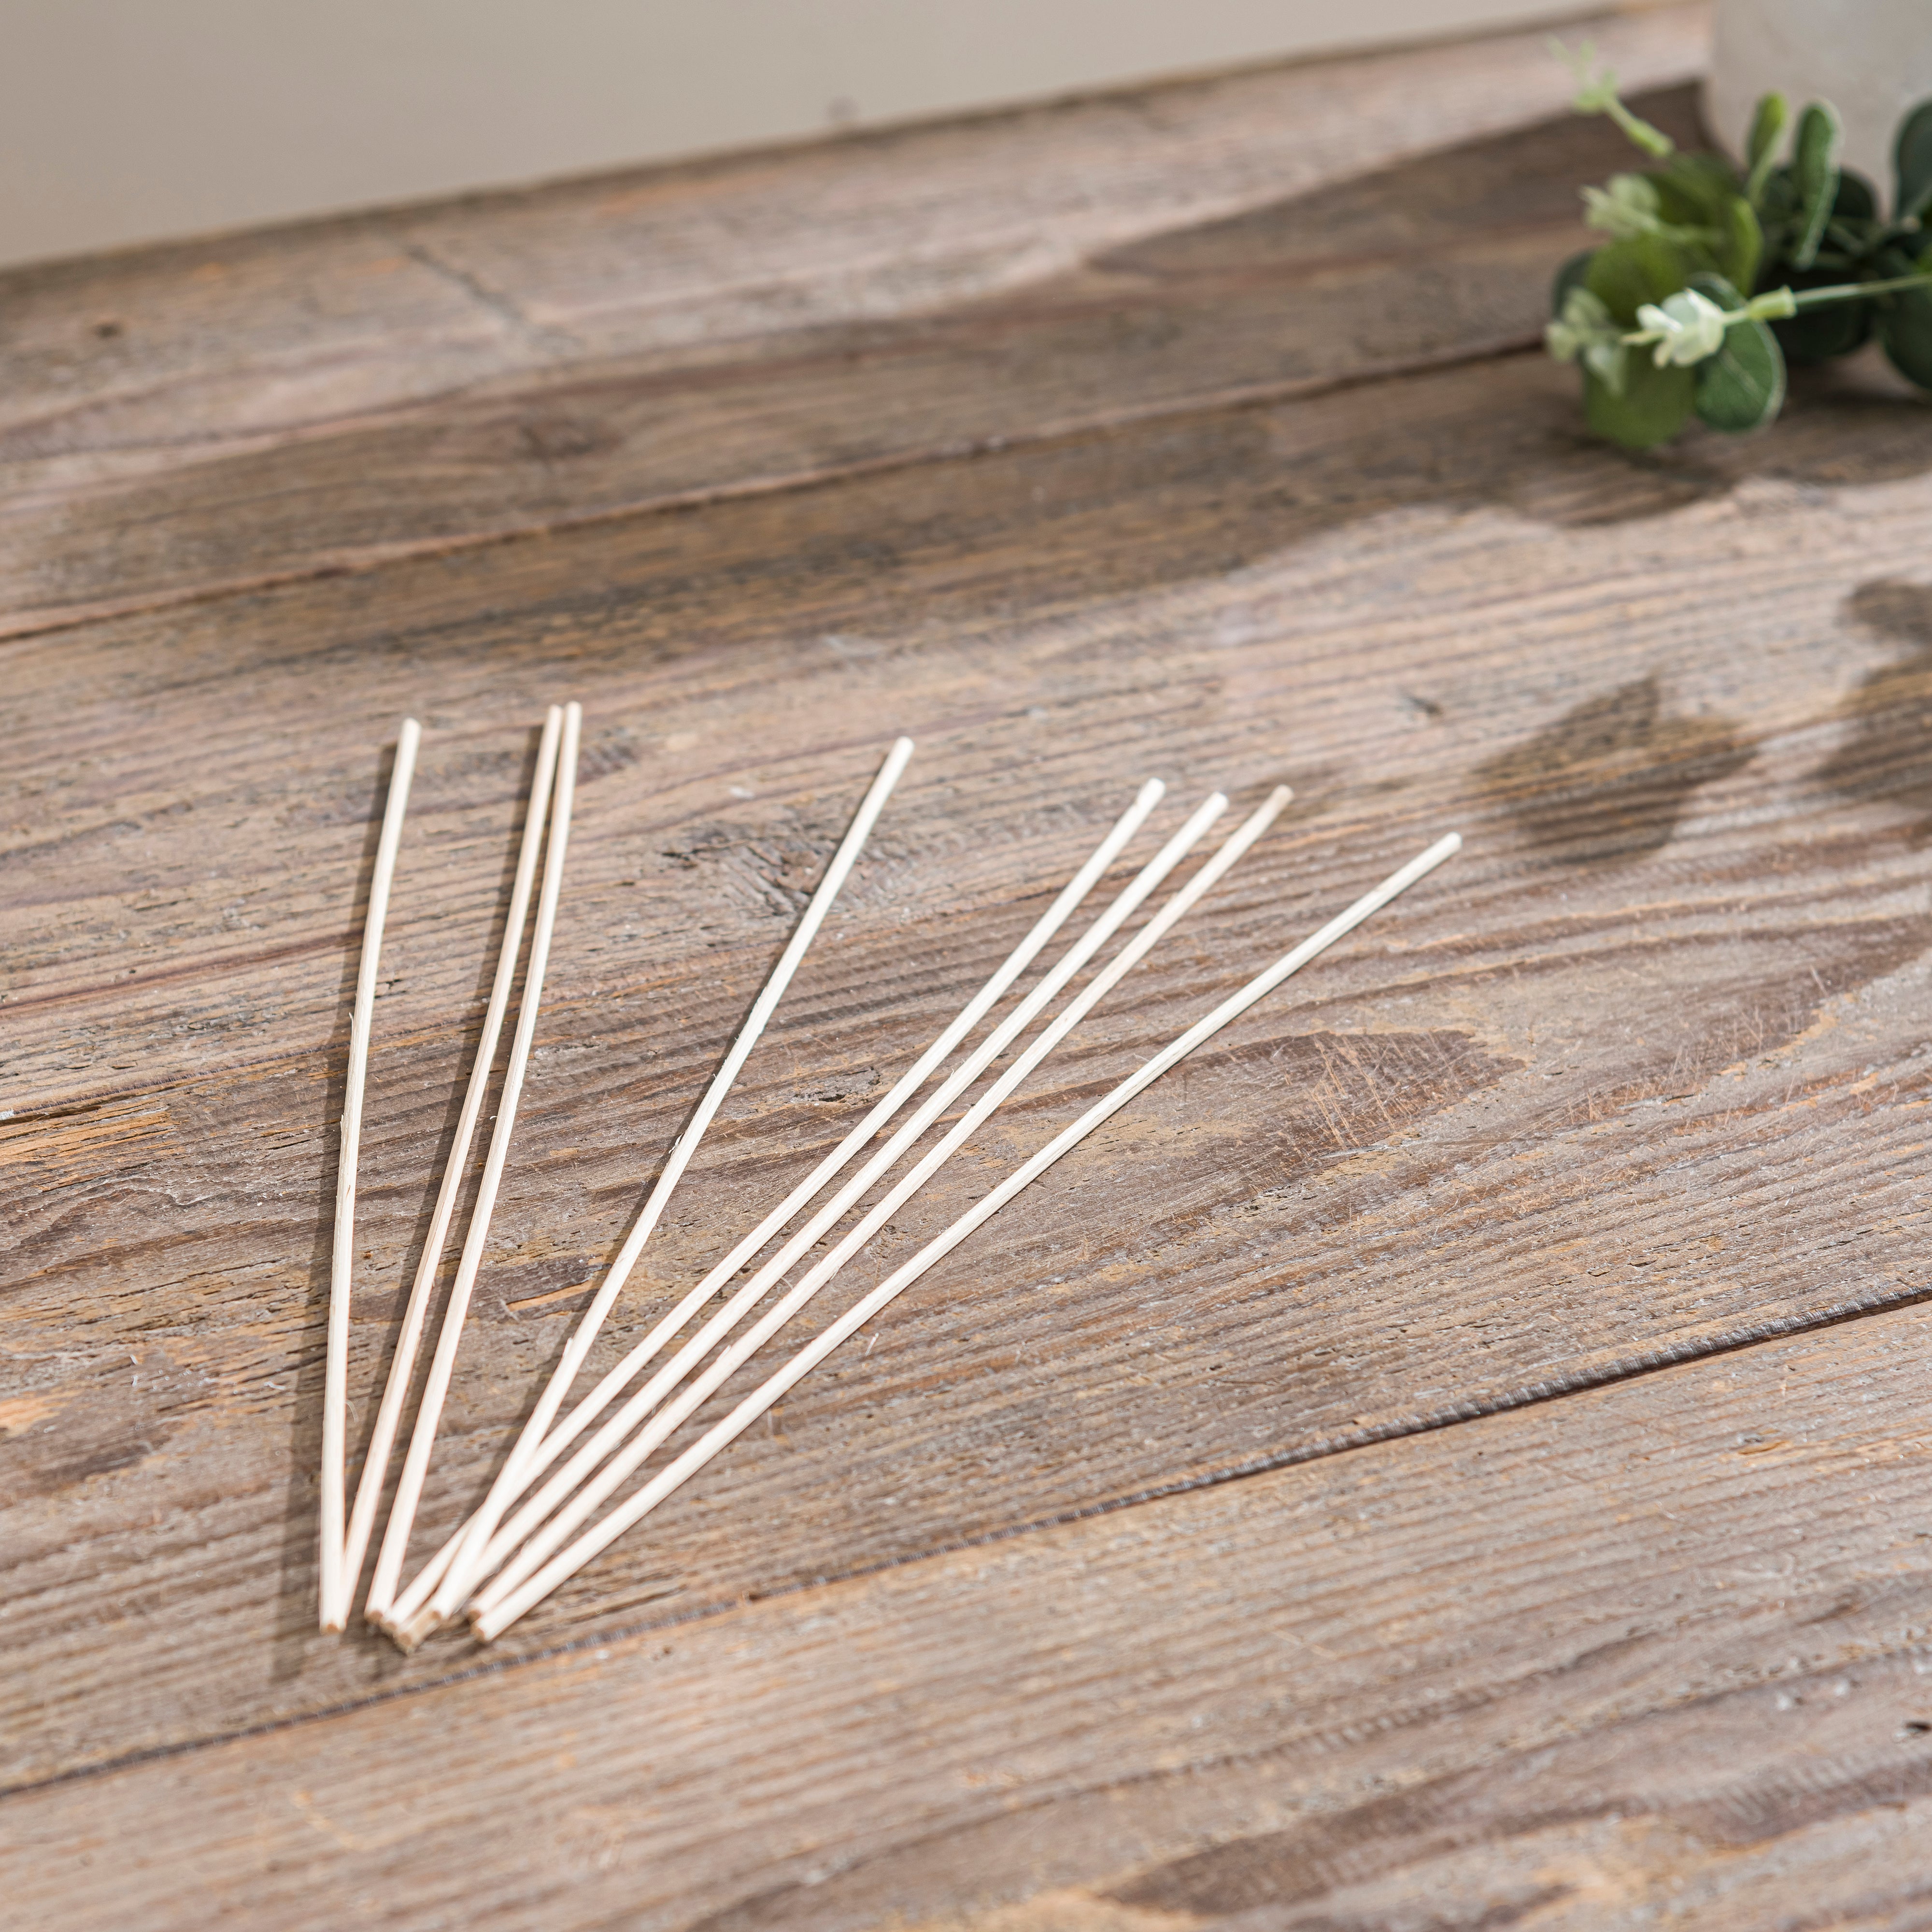 Set of 8 Natural White Replacement Diffuser Reeds